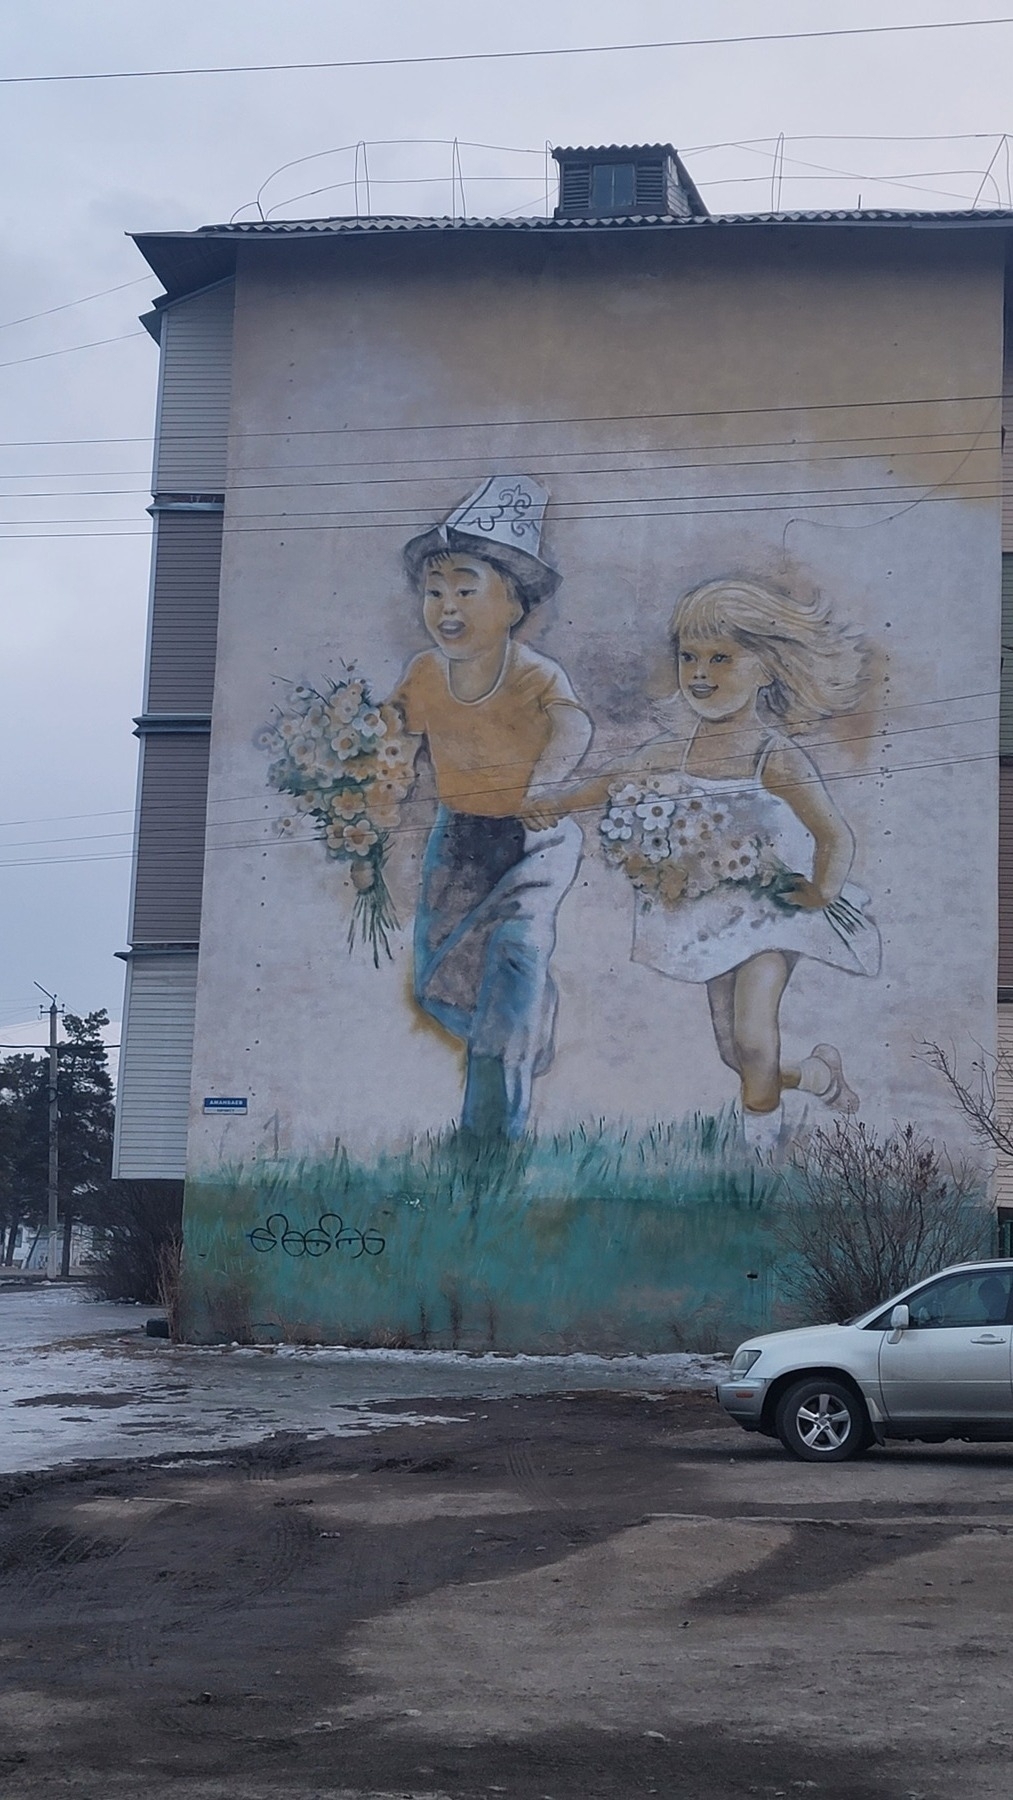 mural on a tan wall of a 4-story building with a young Kyrgyz boy wearing a Kyrgyz hat, orange t-shirt, and jeans; and a little pale, blonde girl wearing a white strap dress. the two children are holding hands and both holding a bunch of flowers, skipping through grass